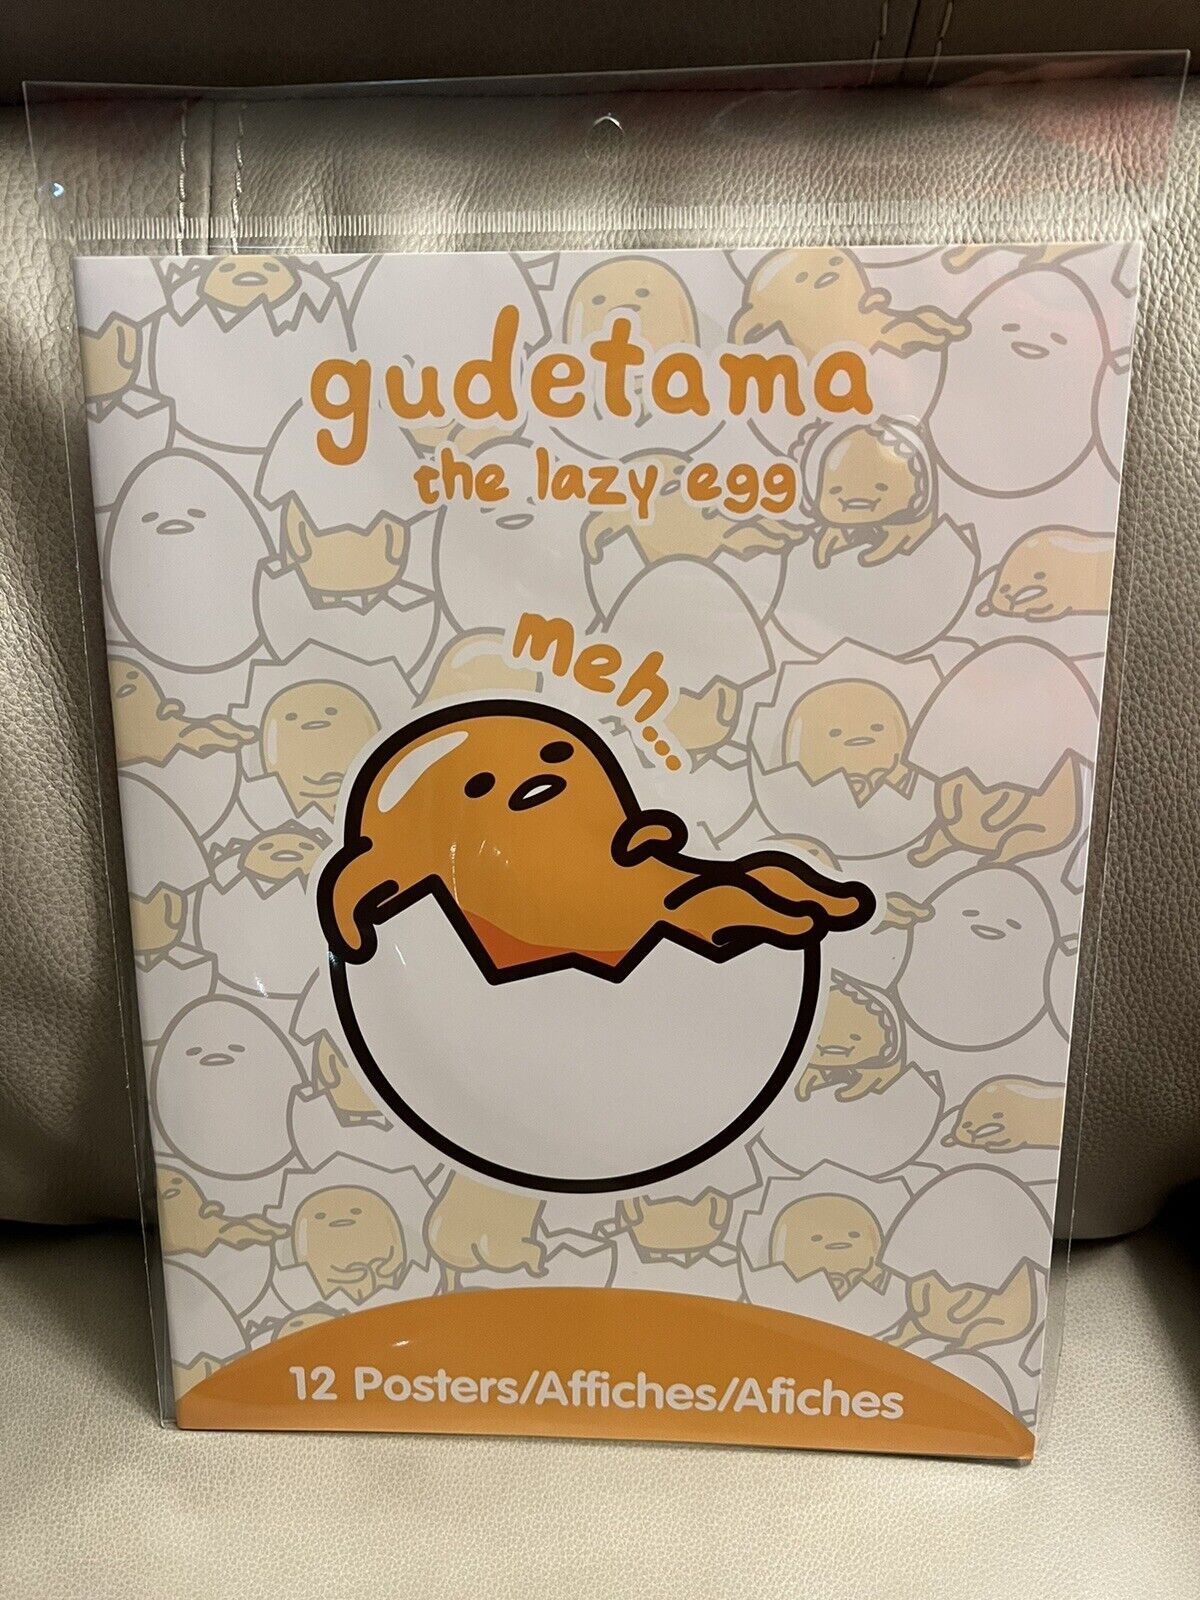 Sanrio GUDETAMA the lazy egg POSTER BOOK of 12 Prints 8x10 NEW Sealed SHIPS FREE